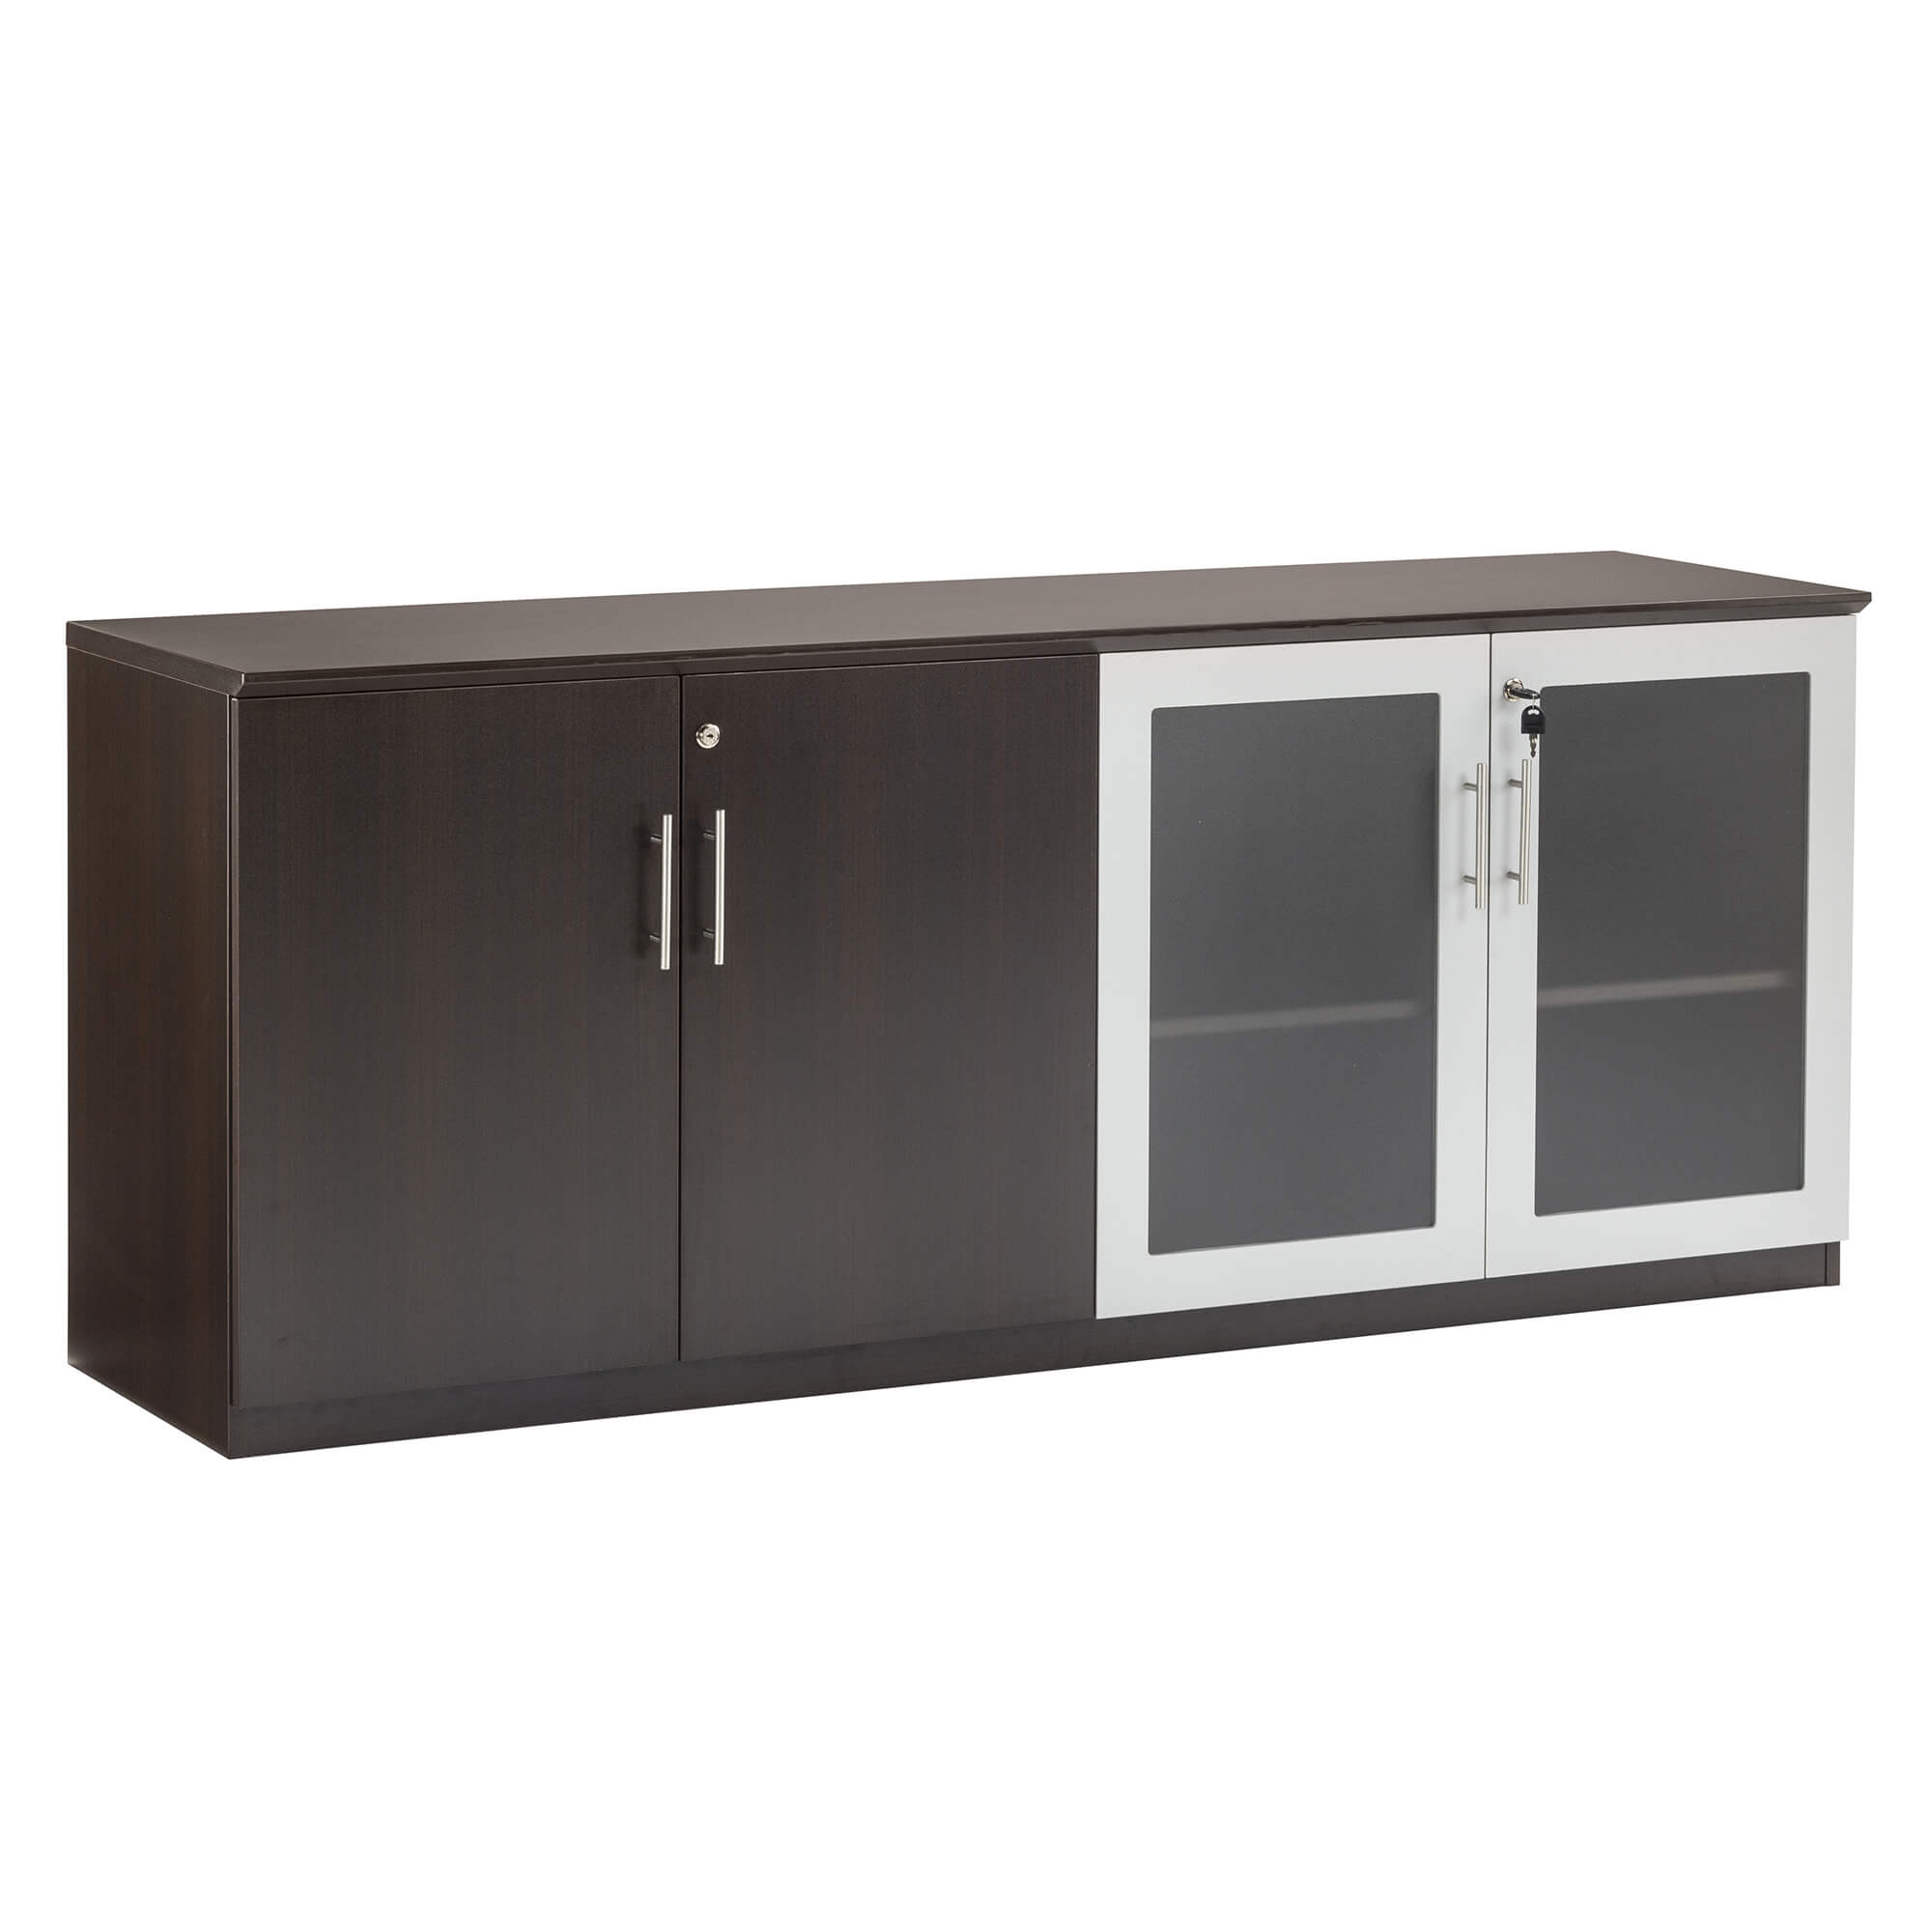 Conference room storage and accessories CUB MVLCLDC FAS